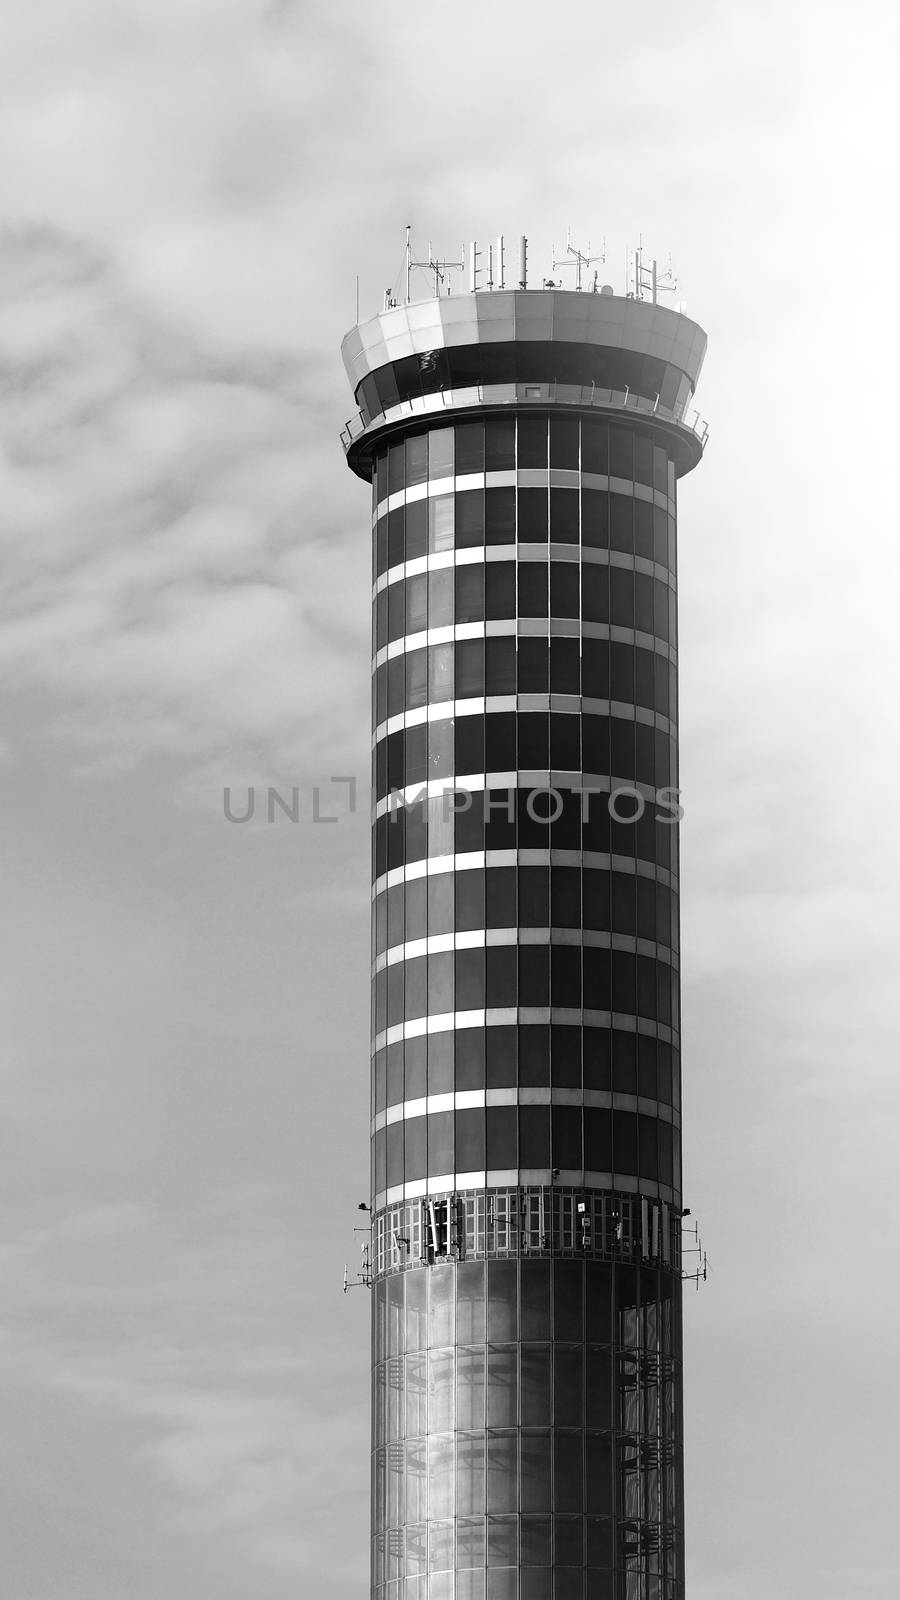 Air traffic contact center tower of Suvarnabhumi international airport Bangkok Thailand which manage queue of runway and communication between airplane for safty in air and ground with technology.